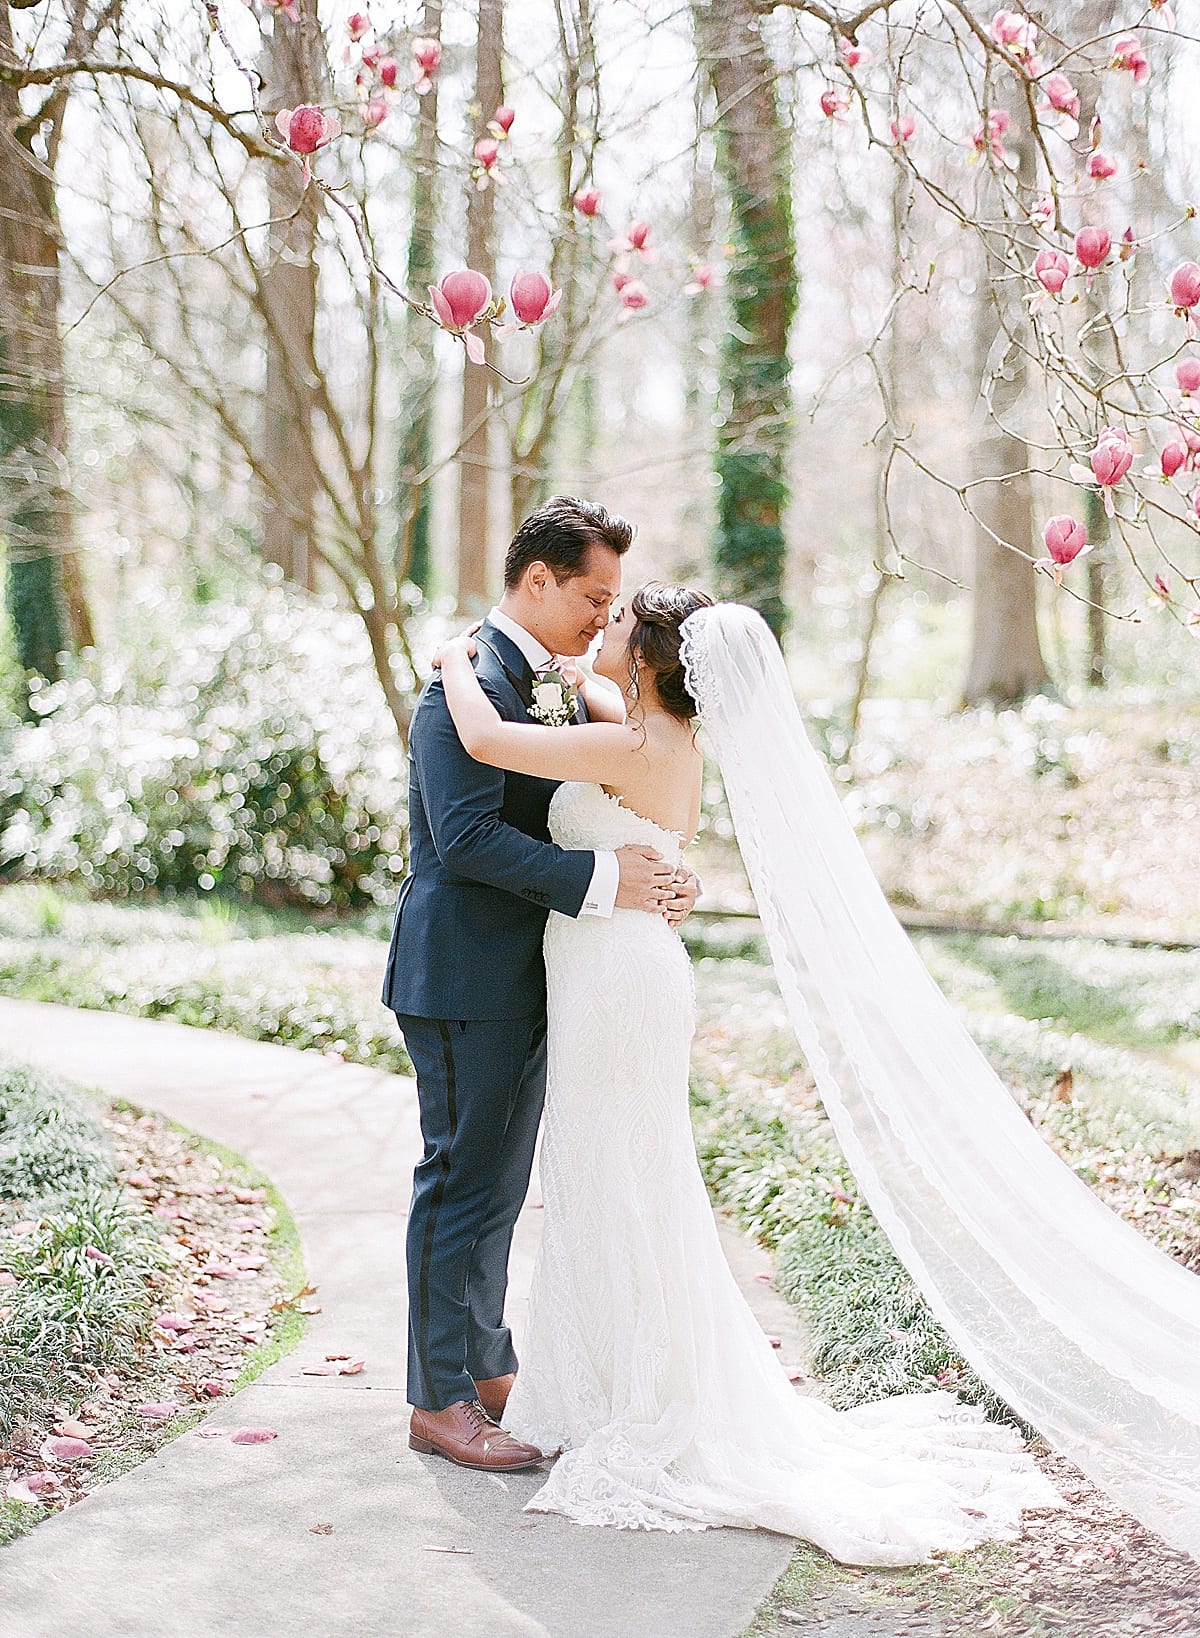 Cator Woolford Gardens Couple Kissing Under Pink Dogwood Tree Photo